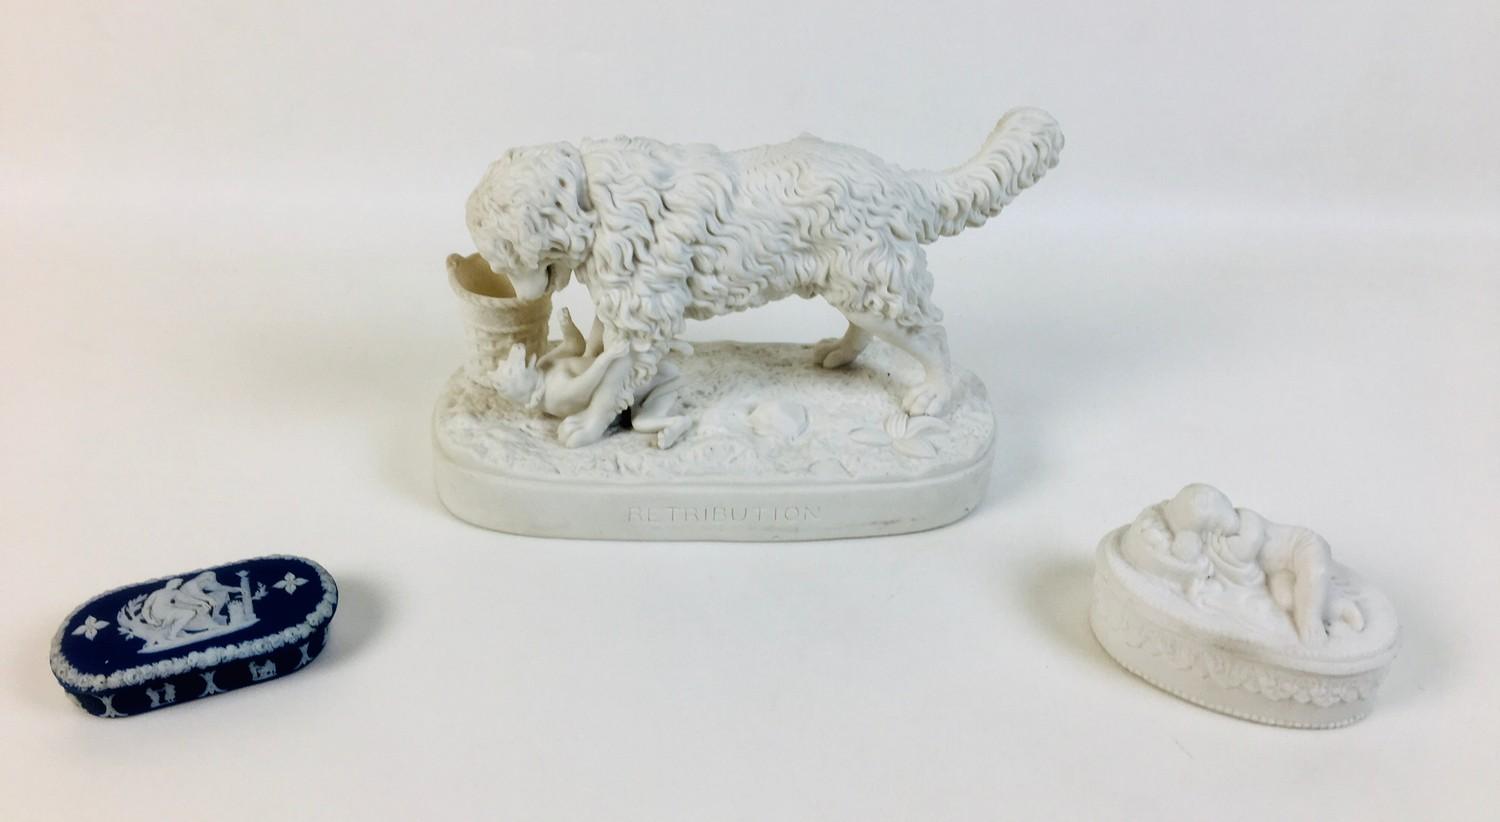 A Victorian Parian ware animal figure group entitled 'Retribution', depicting a large dog standing